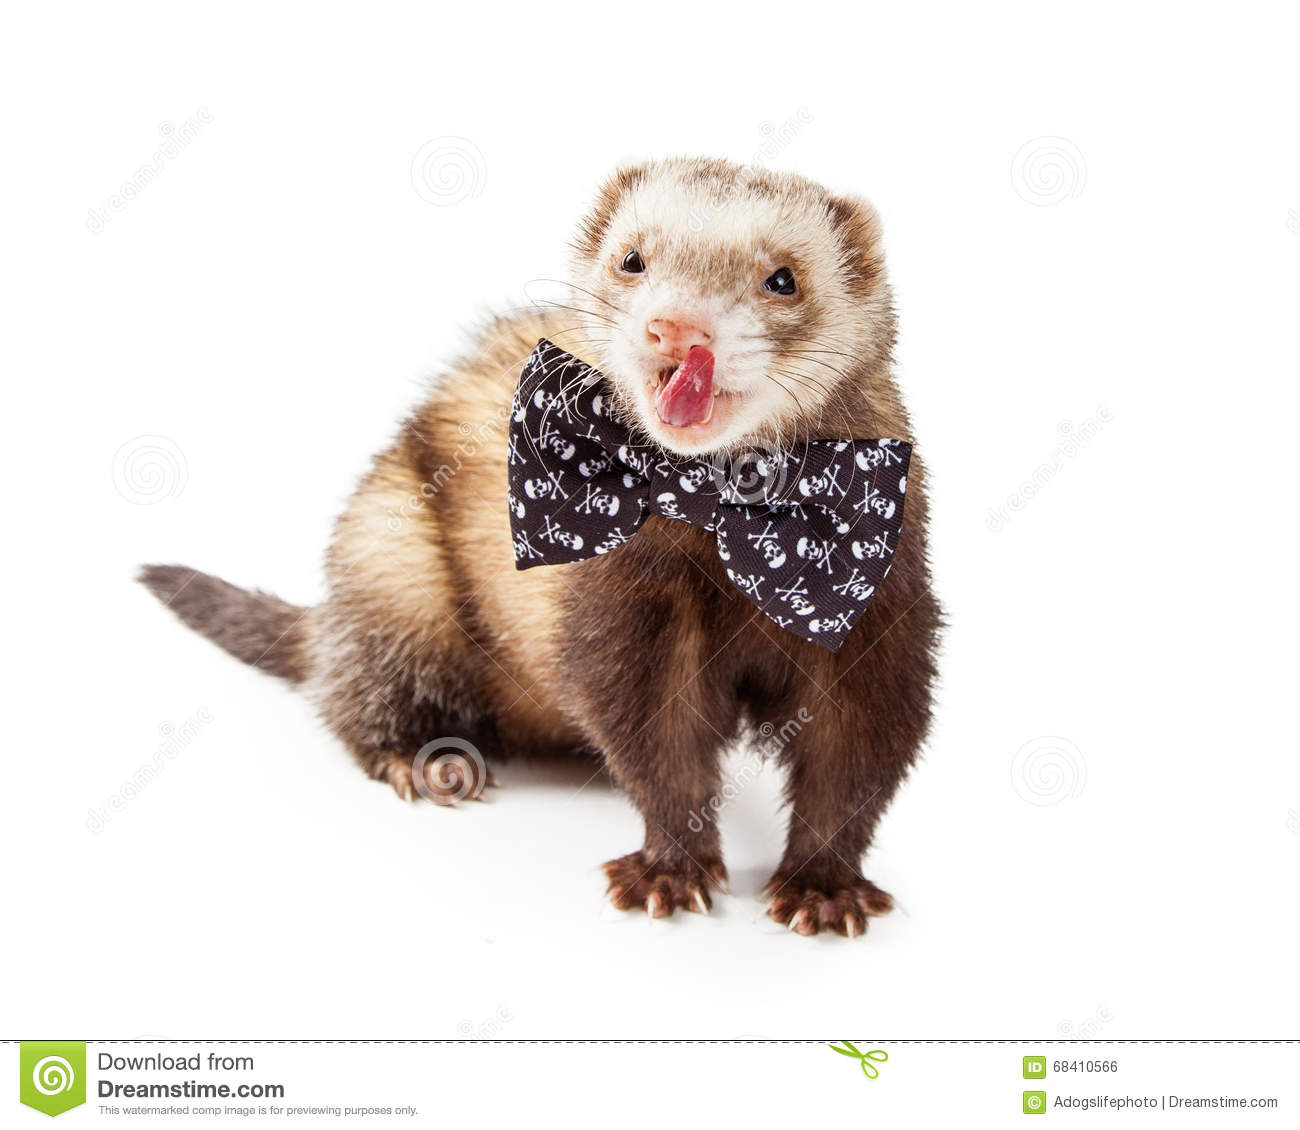 ferret wearing bow tie - dream reme dirim Joeomruime Box dreamstime tas Yang dreamer dream zime Id 68410566 Download from Dreamstime.com This watermarked comp image is for previewing purposes only. Adogslifephoto Dreamstime.com